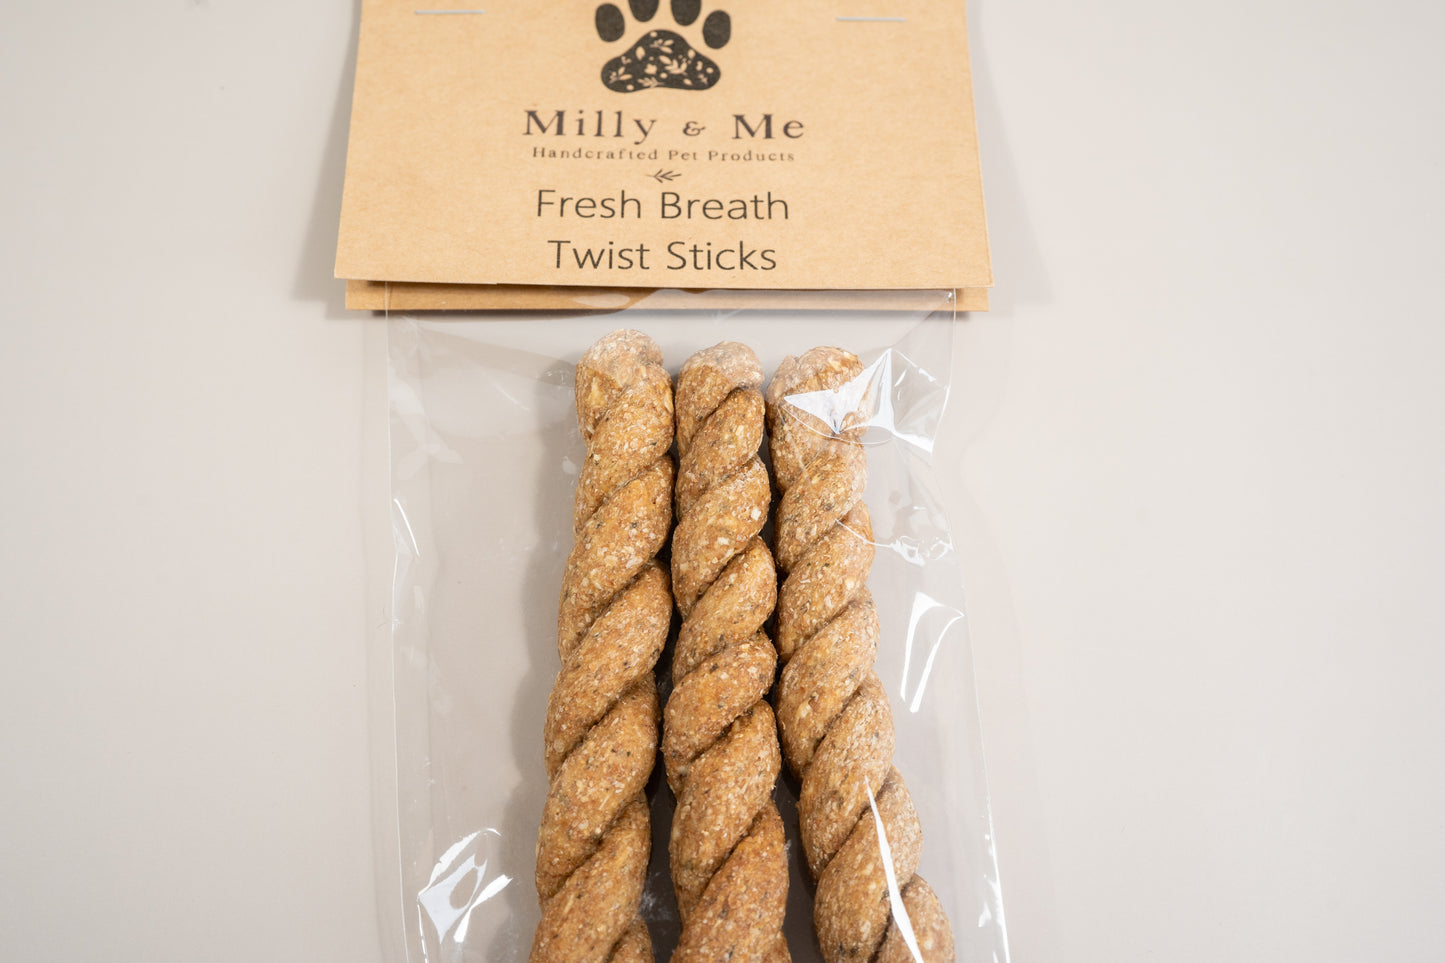 Close-up view of the 3 twisted stick fresh breath dog treats.